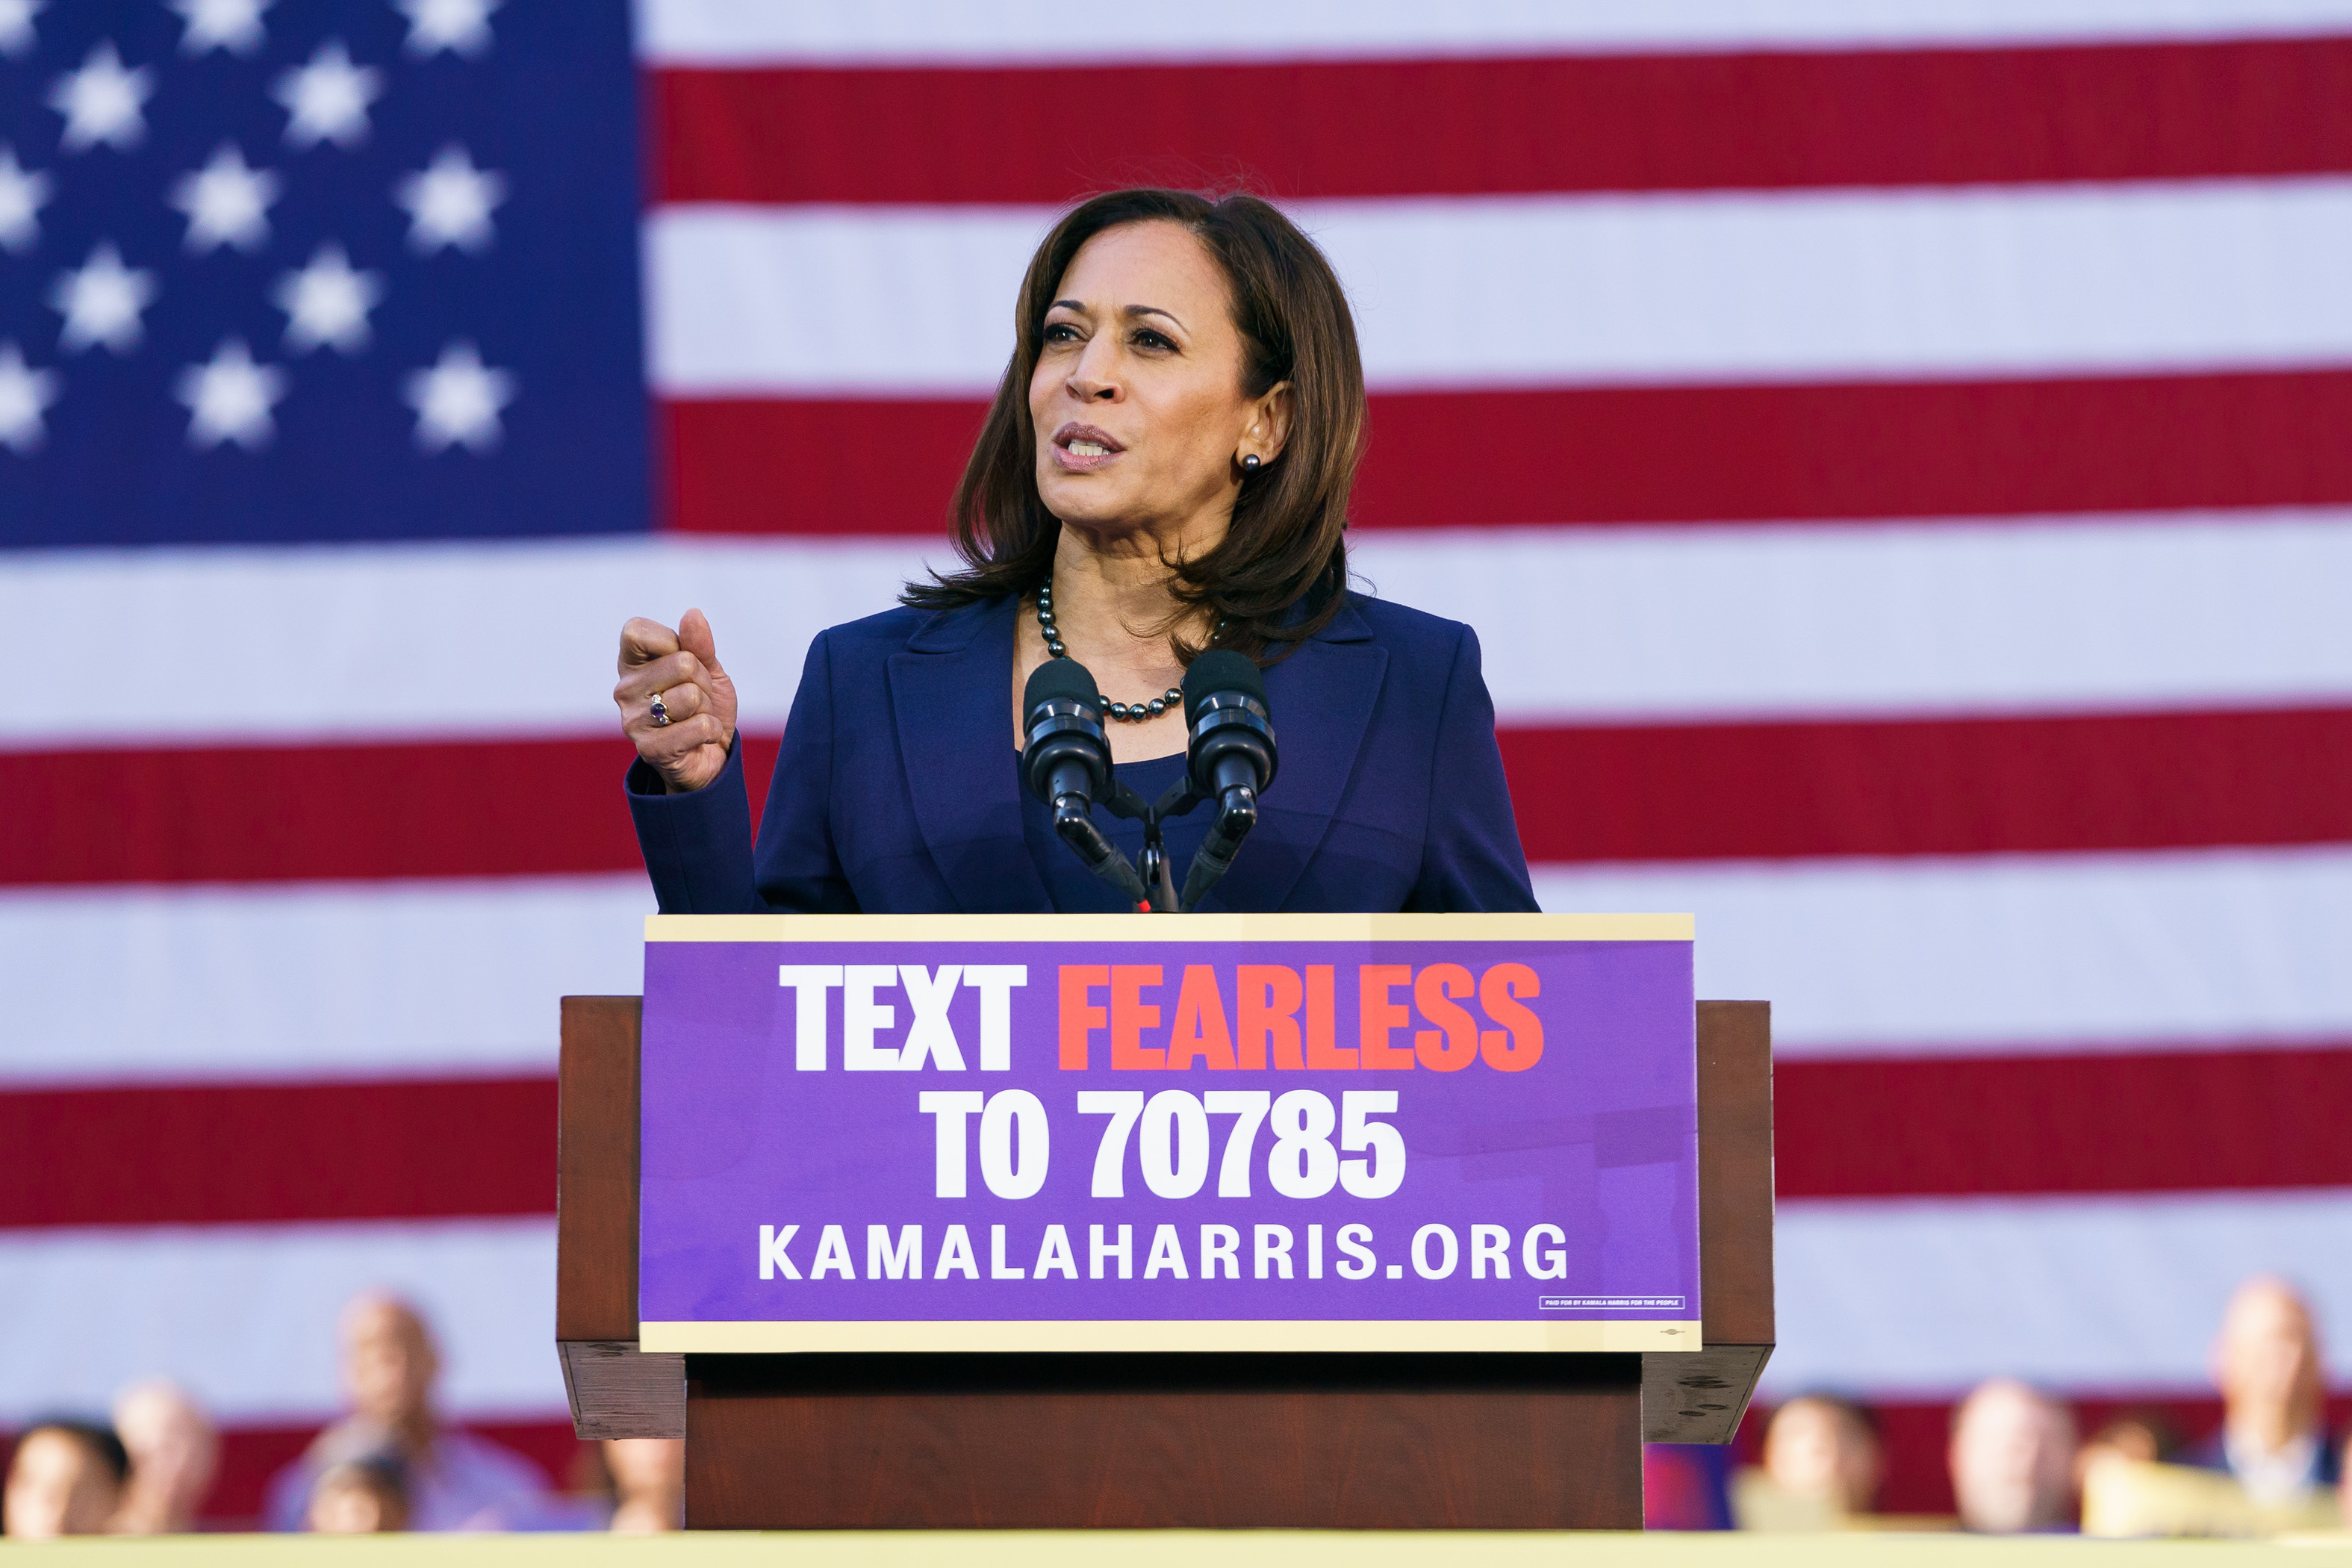 U.S. Senator Kamala Harris (D-CA) speaks to her supporters during her presidential campaign launch rally in Frank H. Ogawa Plaza on January 27, 2019, in Oakland, California. Twenty thousand people turned out to see the Oakland native launch her presidential campaign in front of Oakland City Hall. (Photo by Mason Trinca/Getty Images)